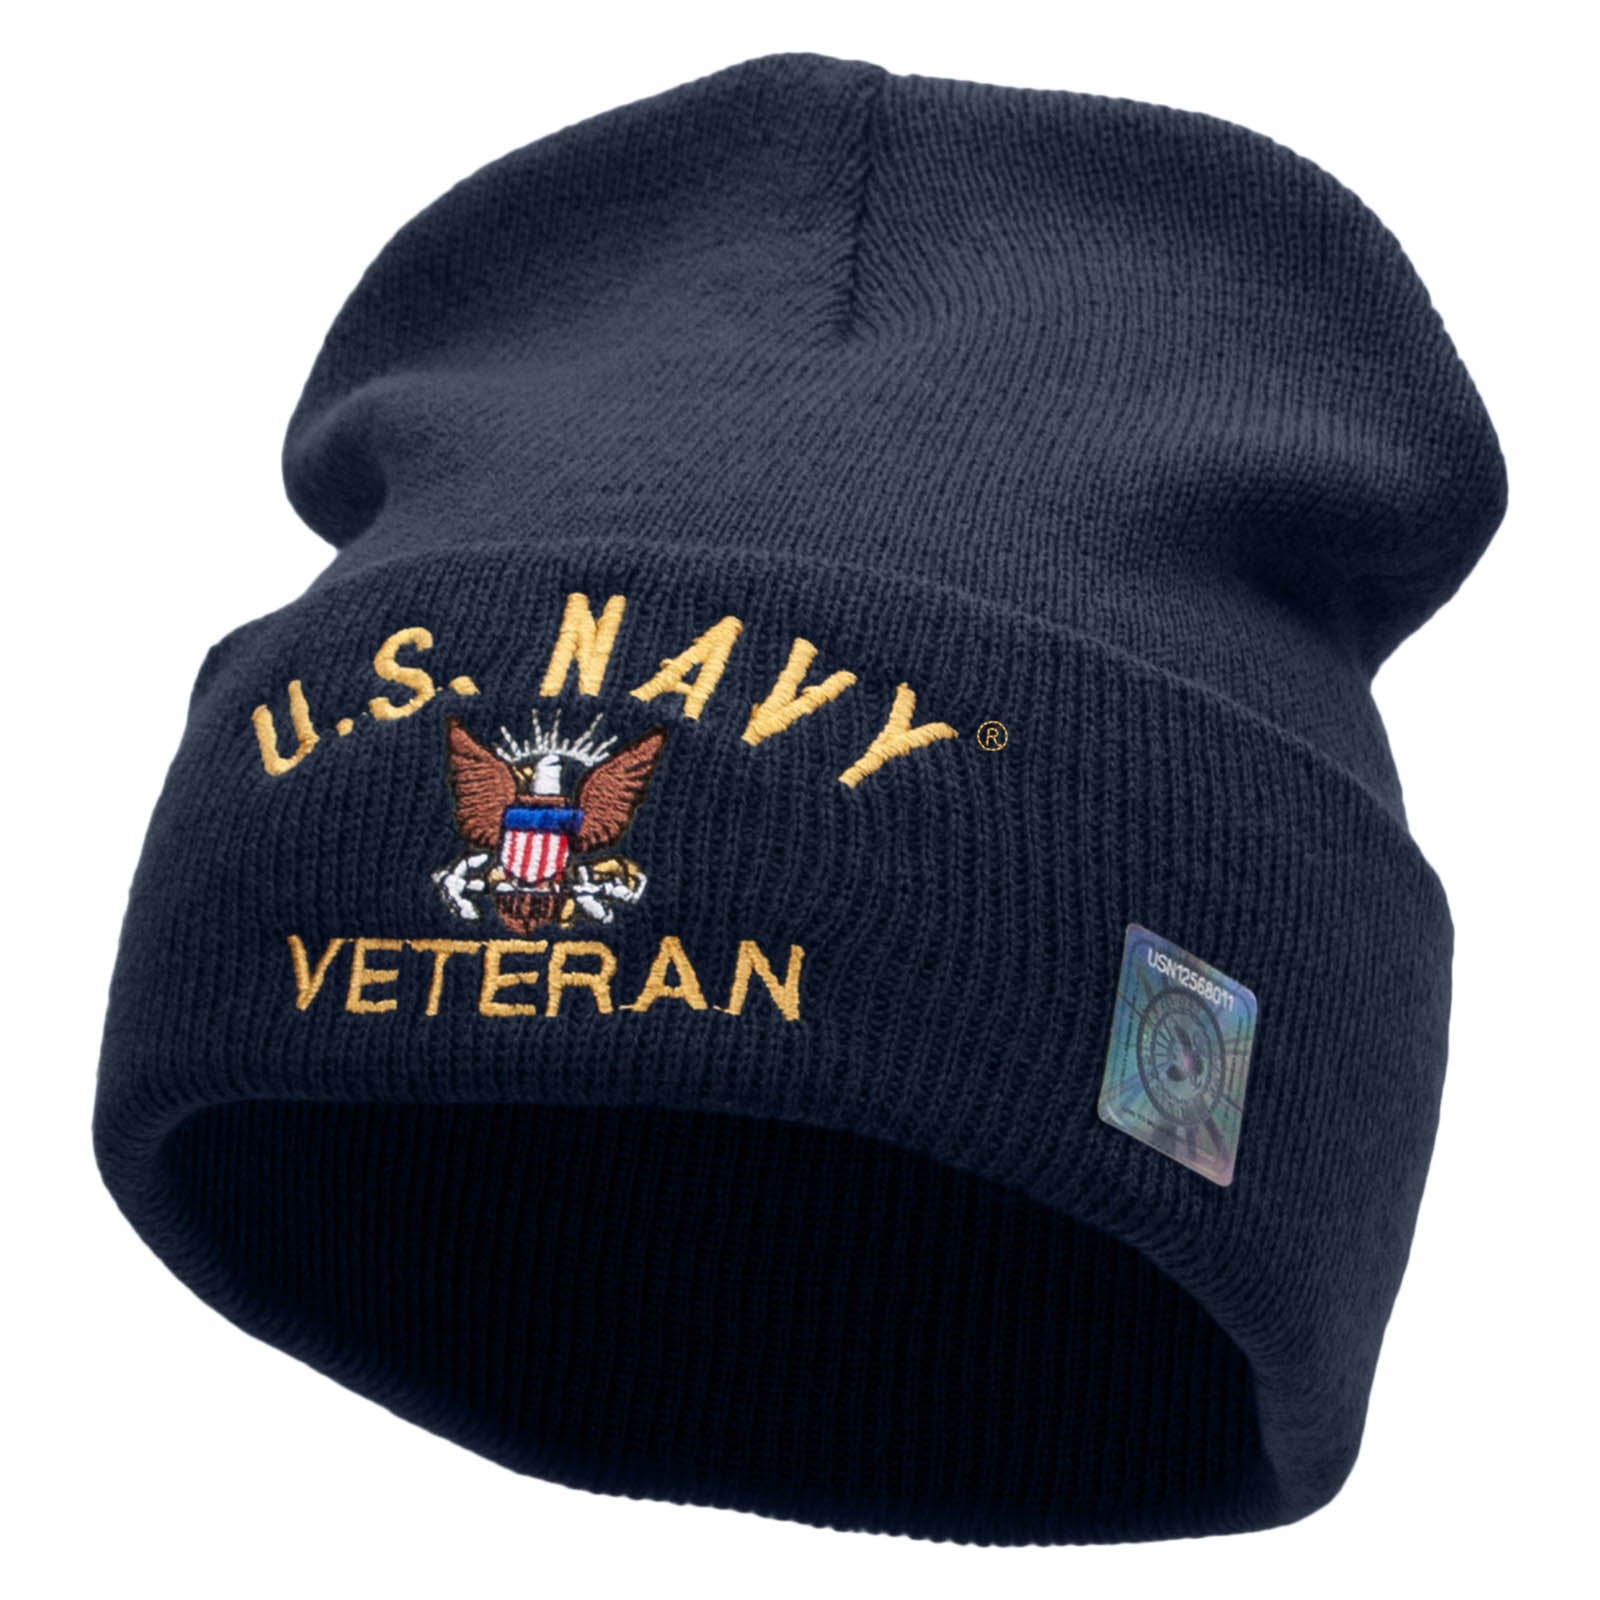 Licensed US Navy Veteran Military Embroidered Long Beanie Made in USA - Navy OSFM